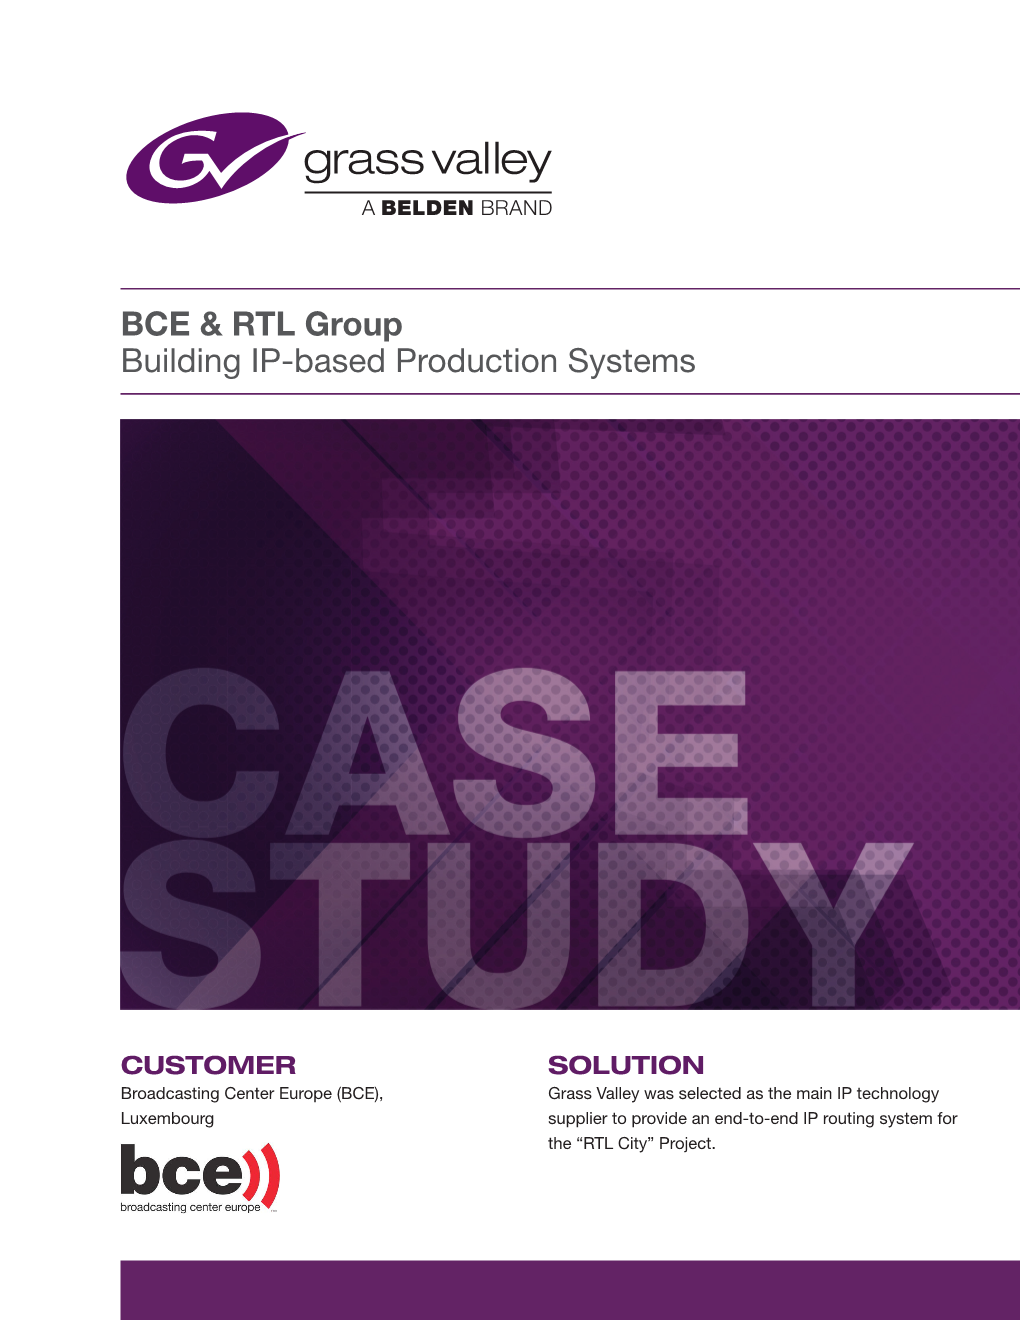 Building IP Based Production Systems Case Study